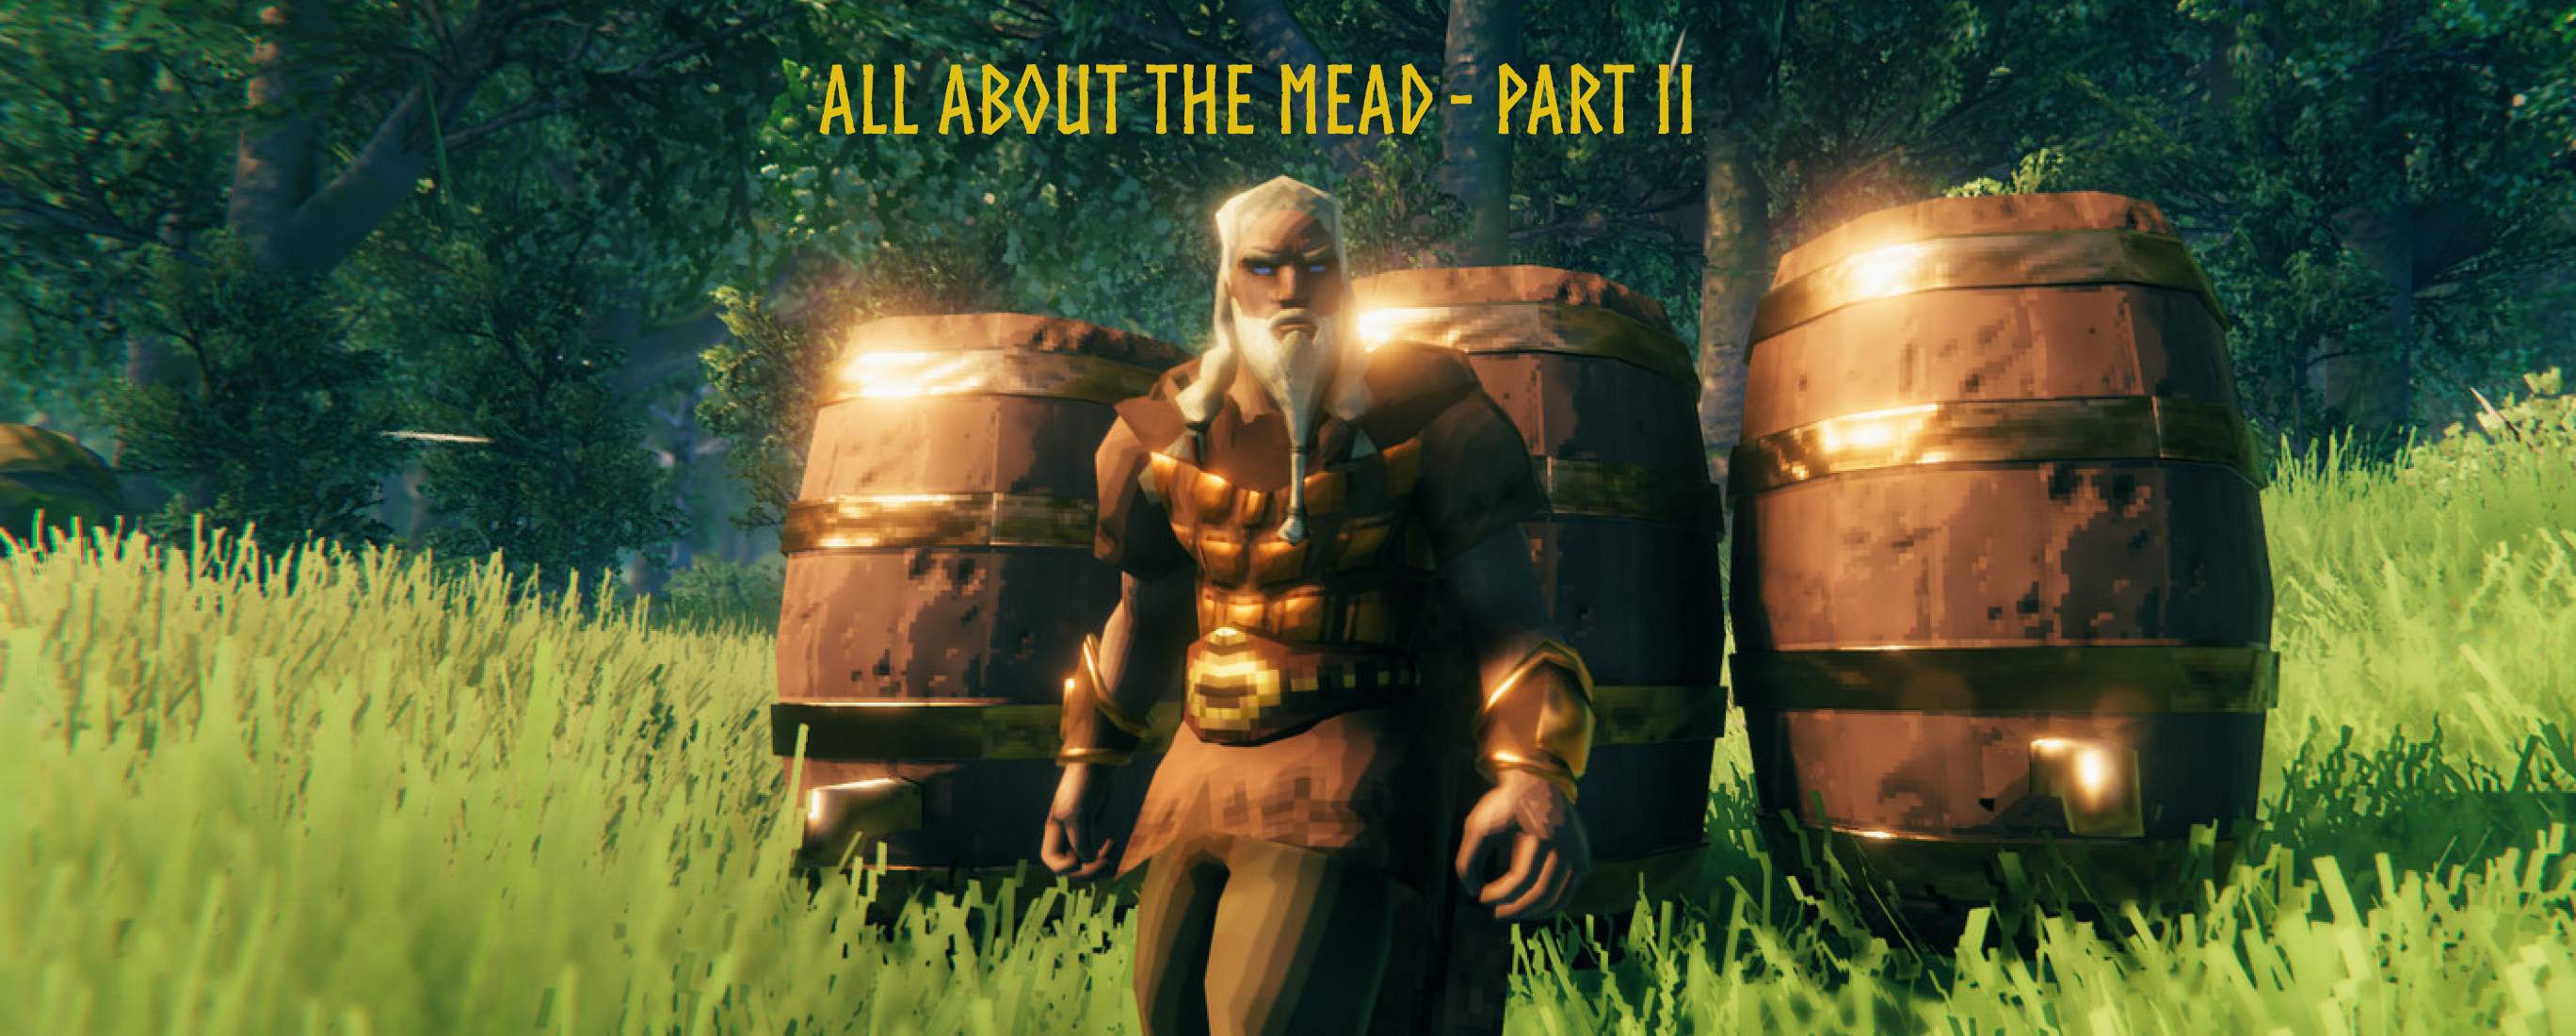 A viking standing next to barrels of mead in Valheim.